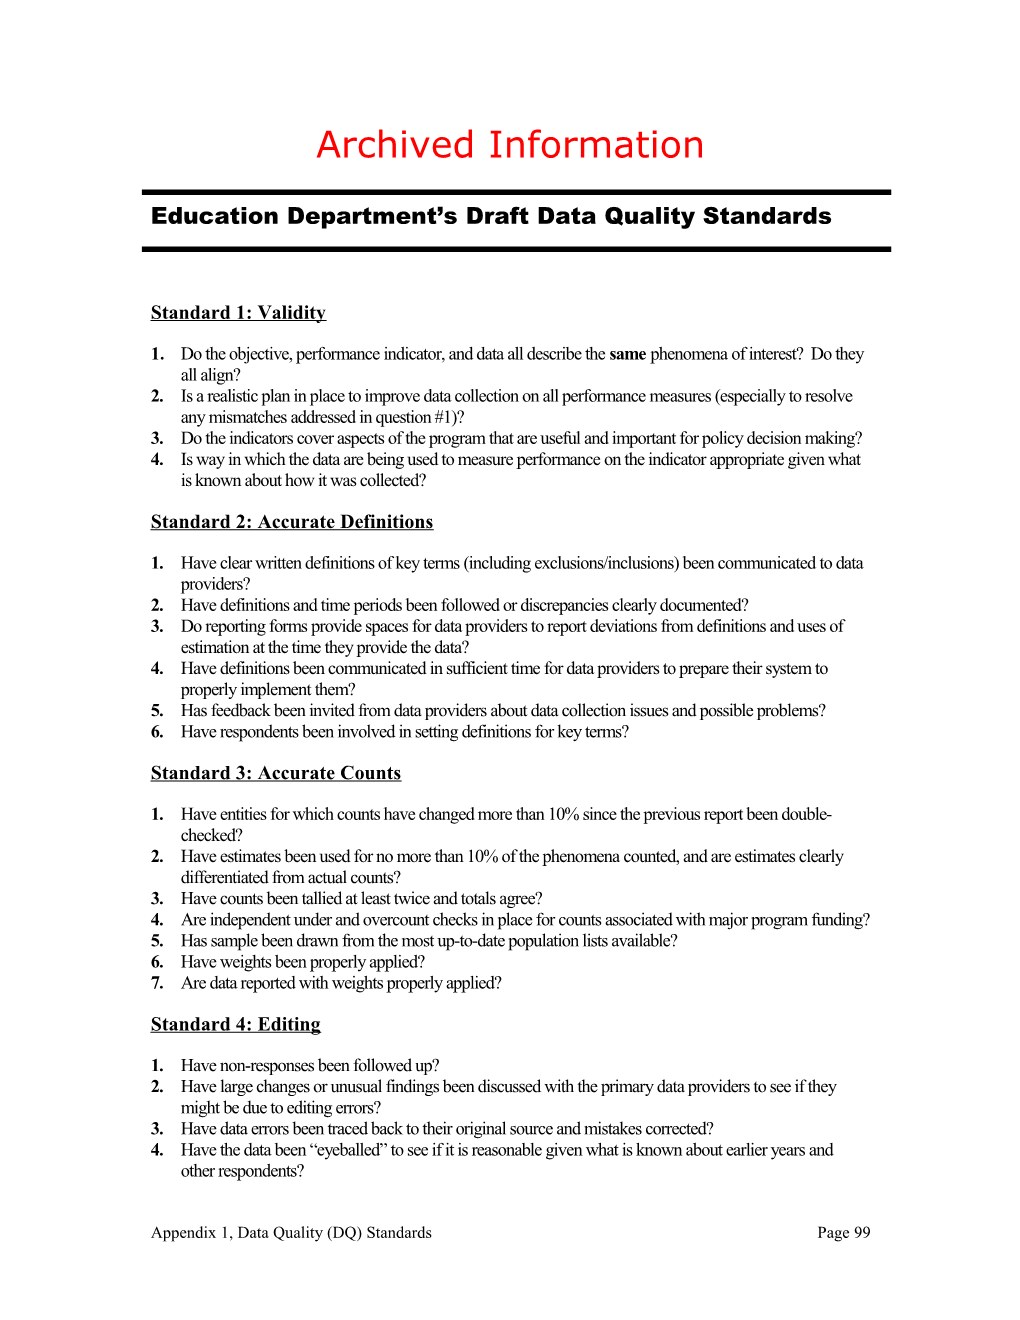 Archived: Education Department's Draft Data Quality Standards